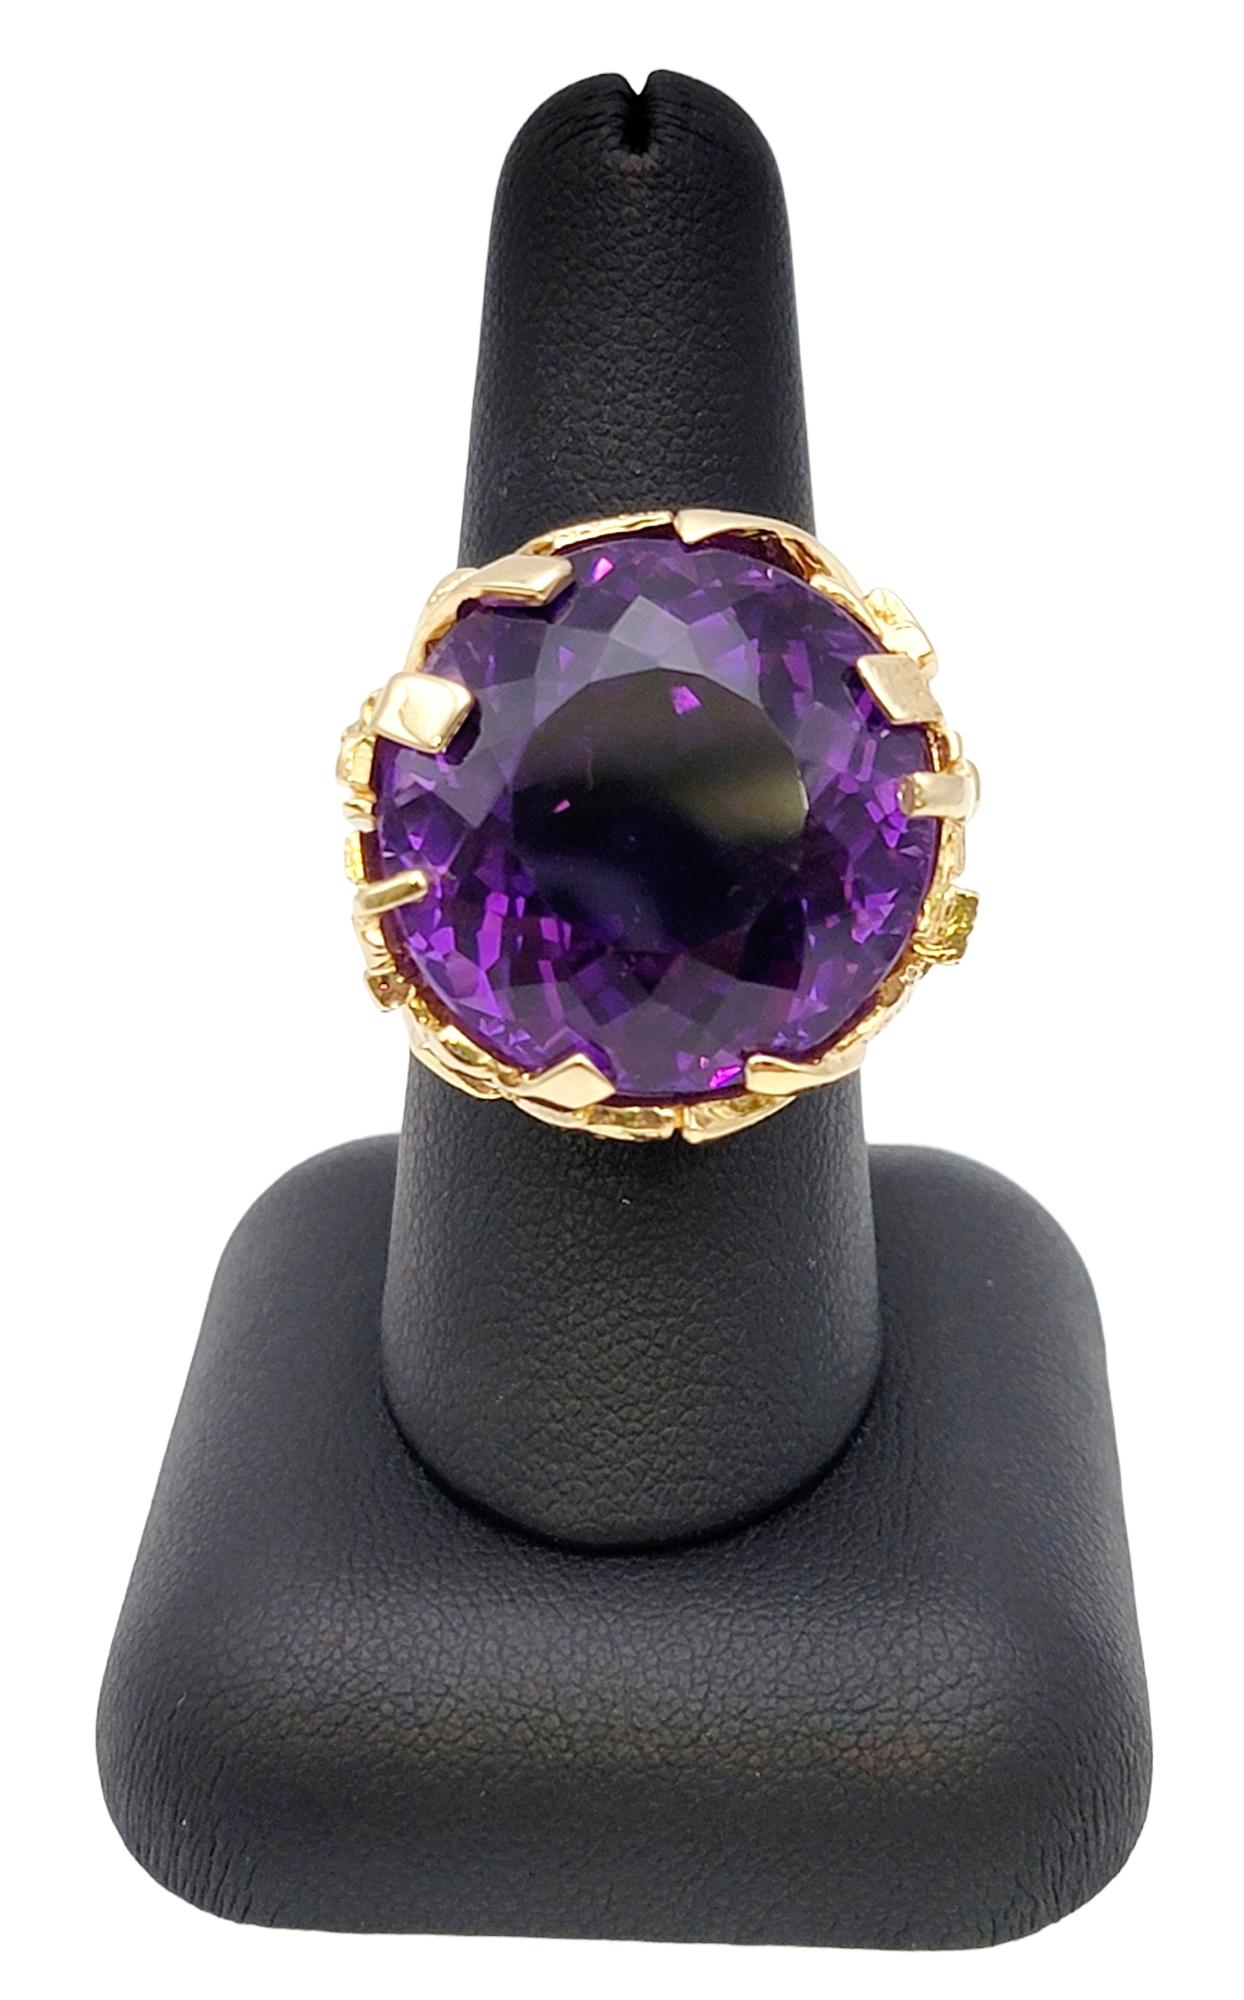 Massive 40.01 Carat Round Cut Amethyst Solitaire Cocktail Ring in Yellow Gold  For Sale 6